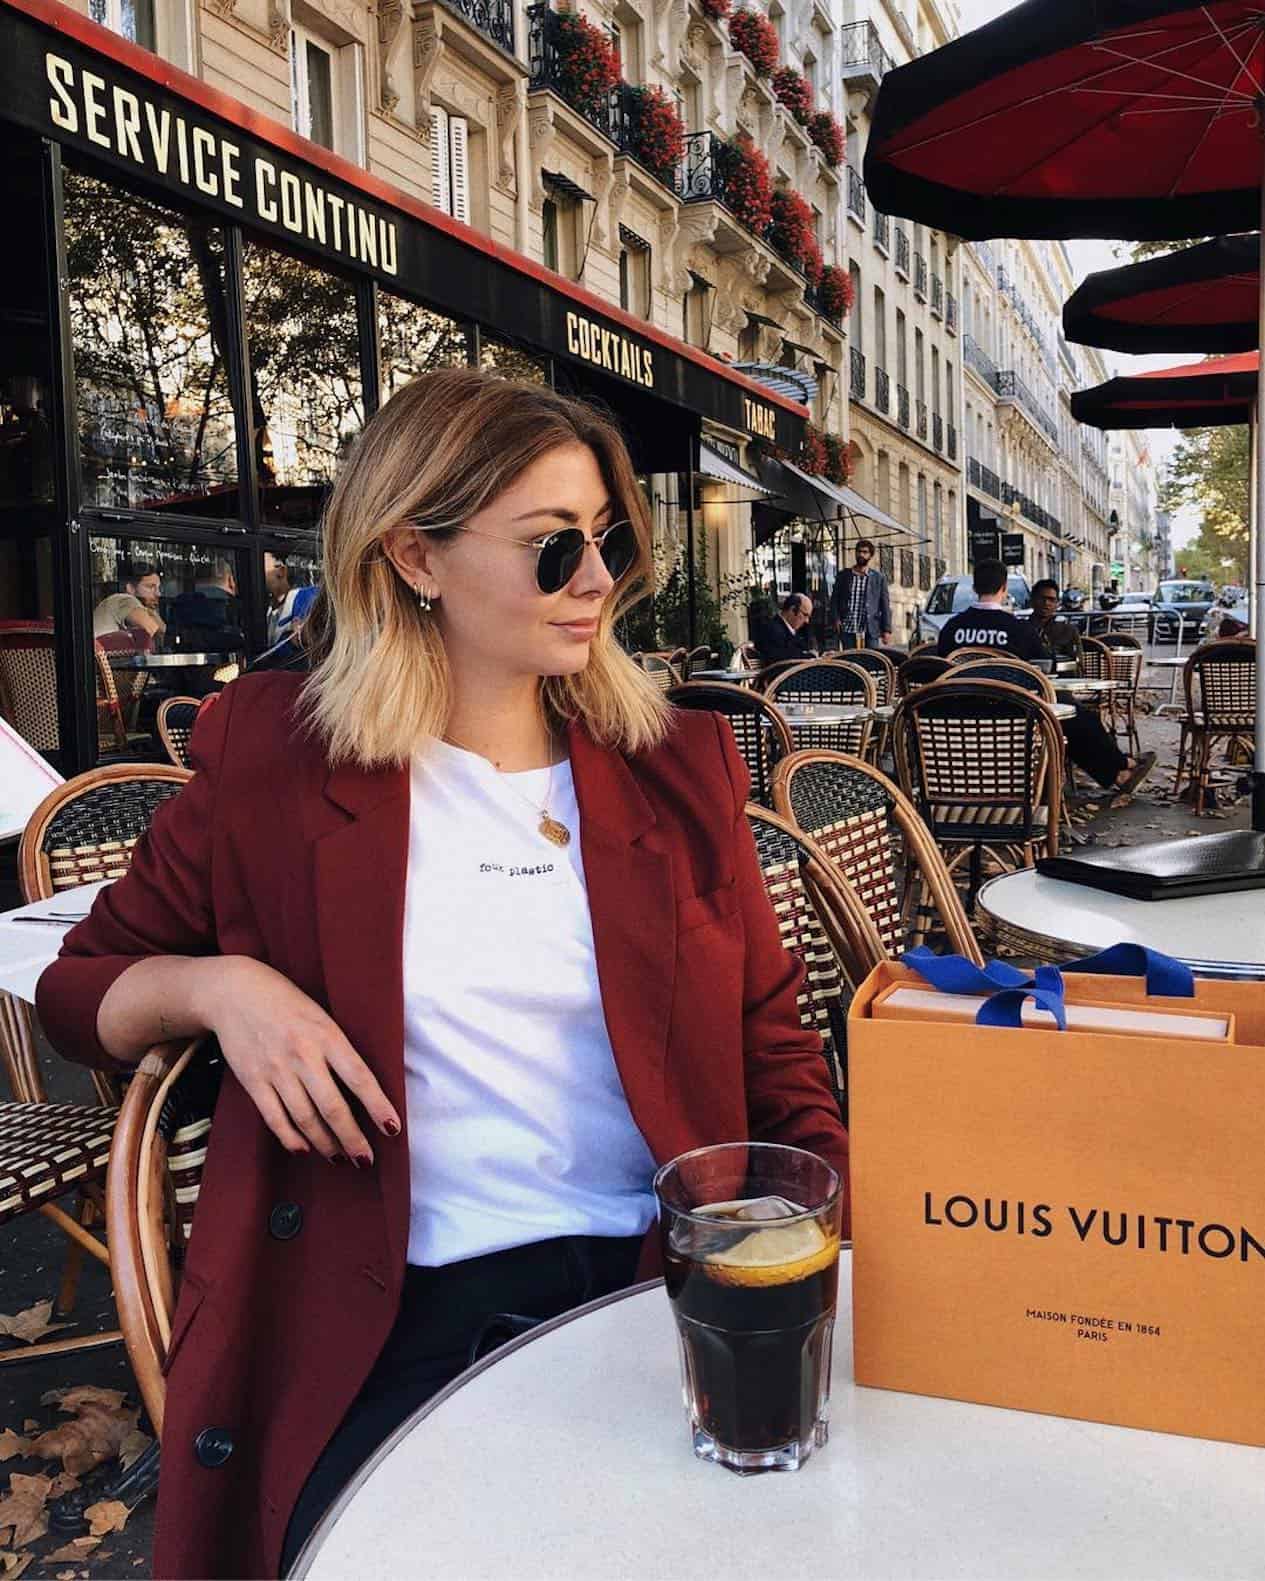 a woman sits on a chair in a cafe with a red blazer and white t-shirt, sitting on the table is a Louis Vuitton bag